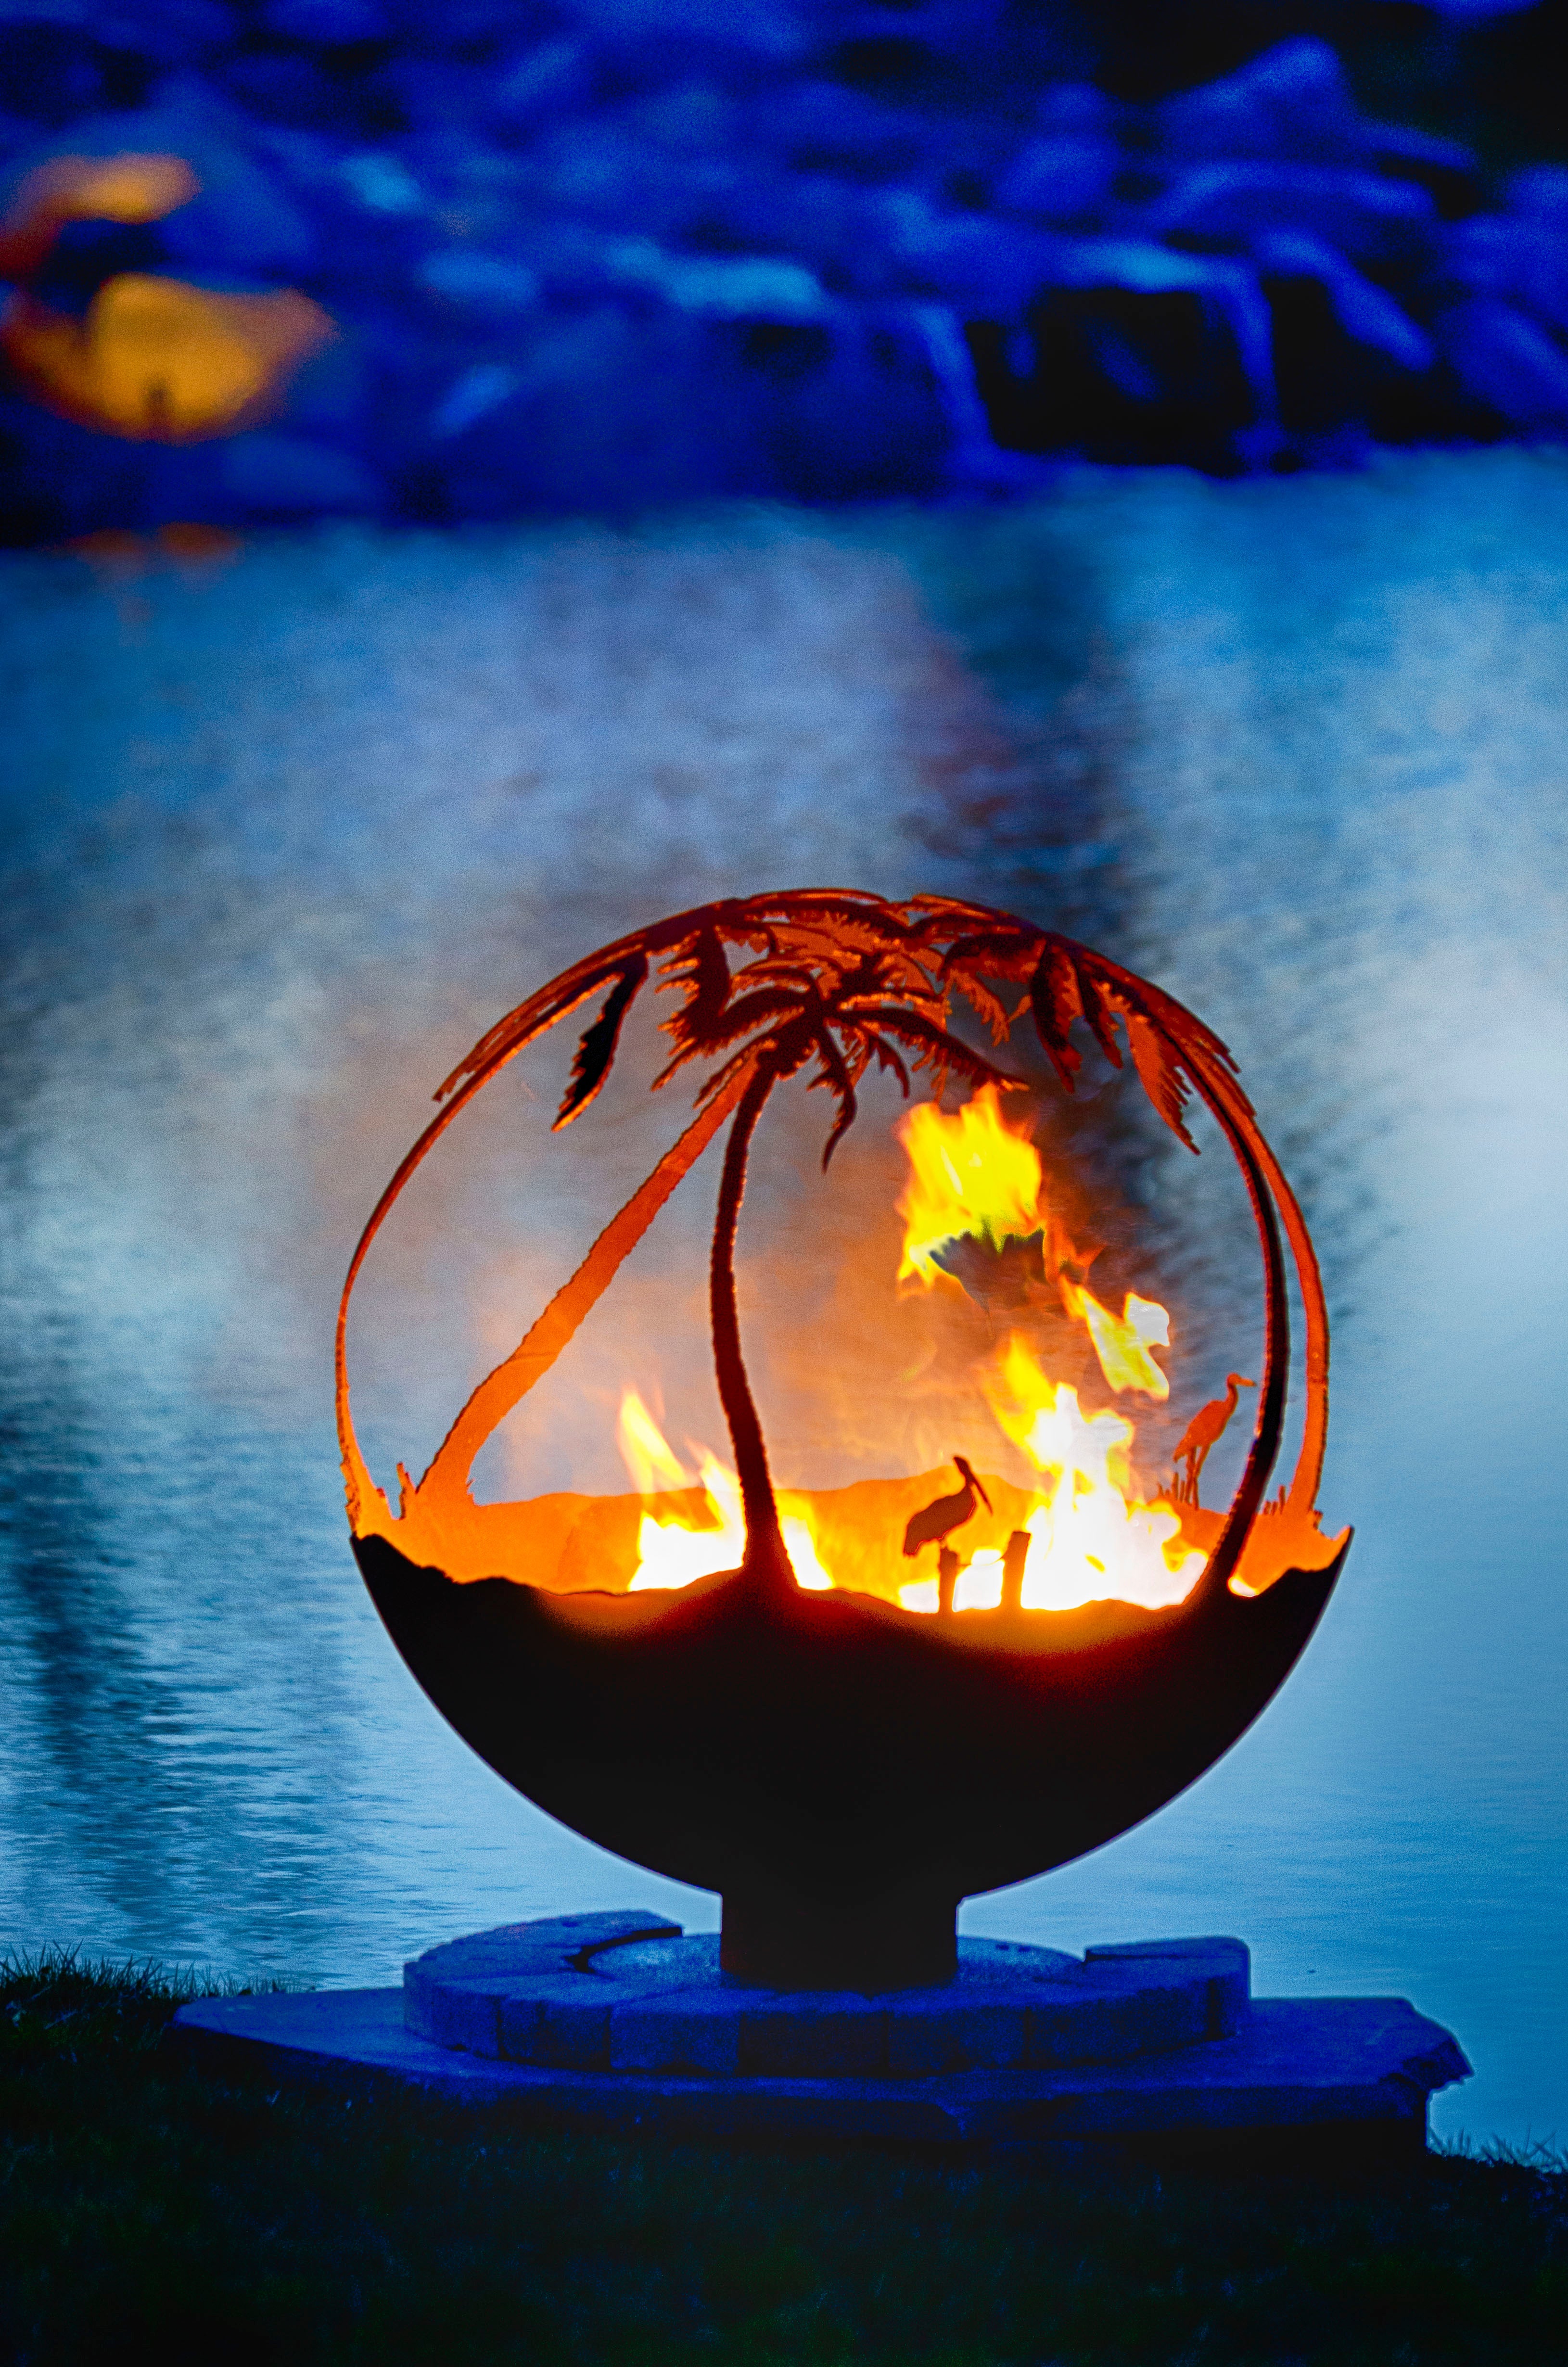 The Fire Pit Gallery Another Day in Paradise Fire Pit Sphere